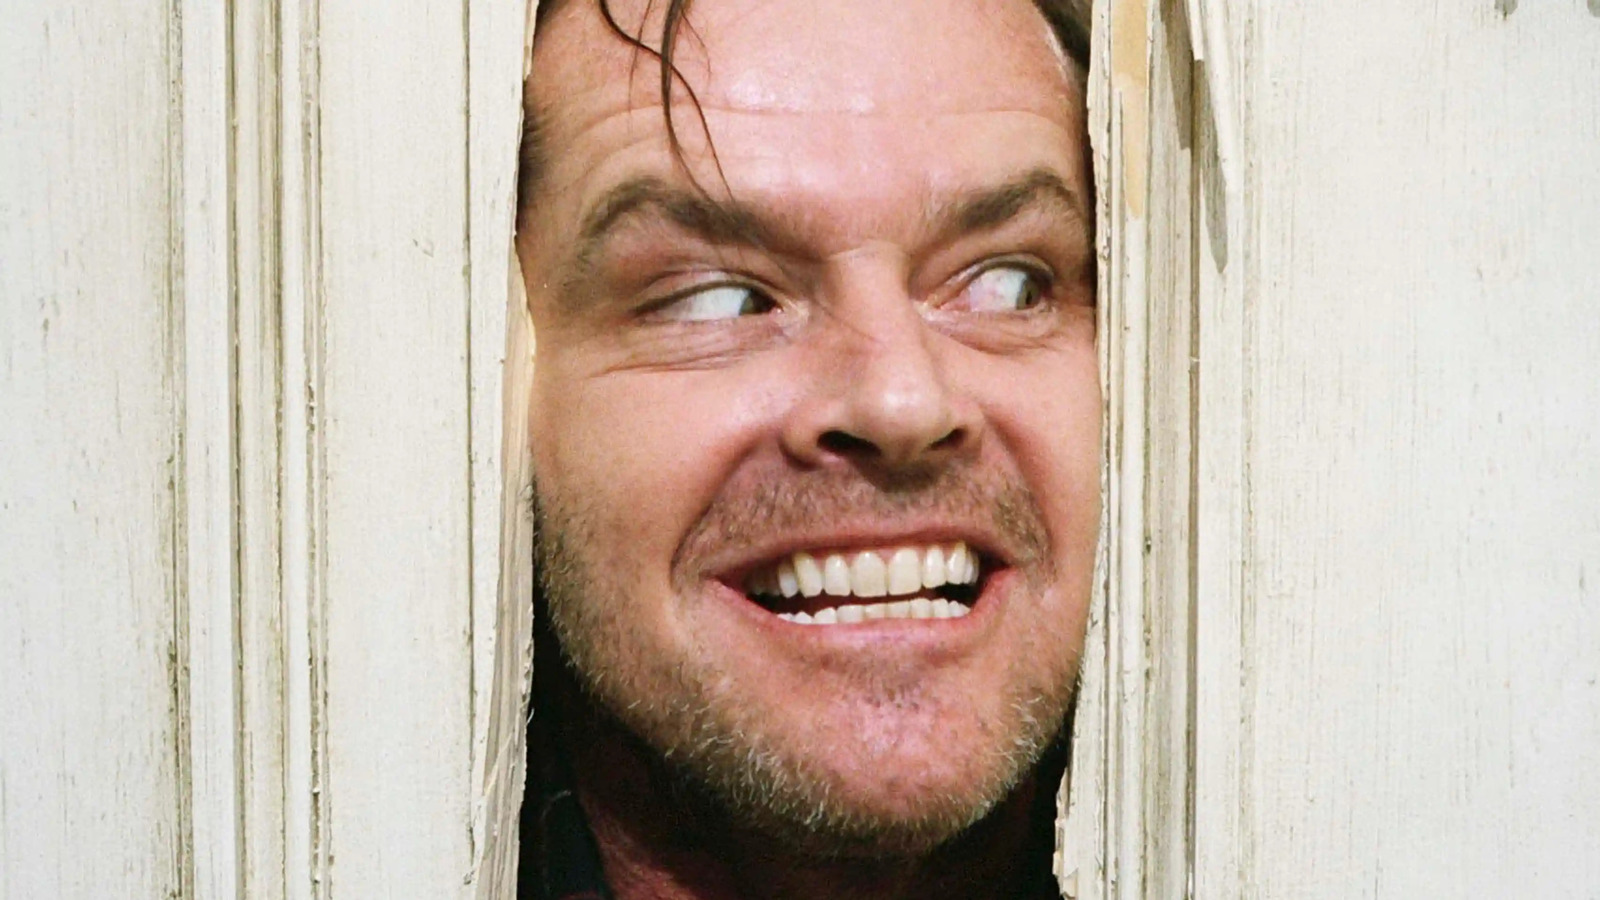 Finding the right "voice" for Jack Torrance was key to The Shining's success